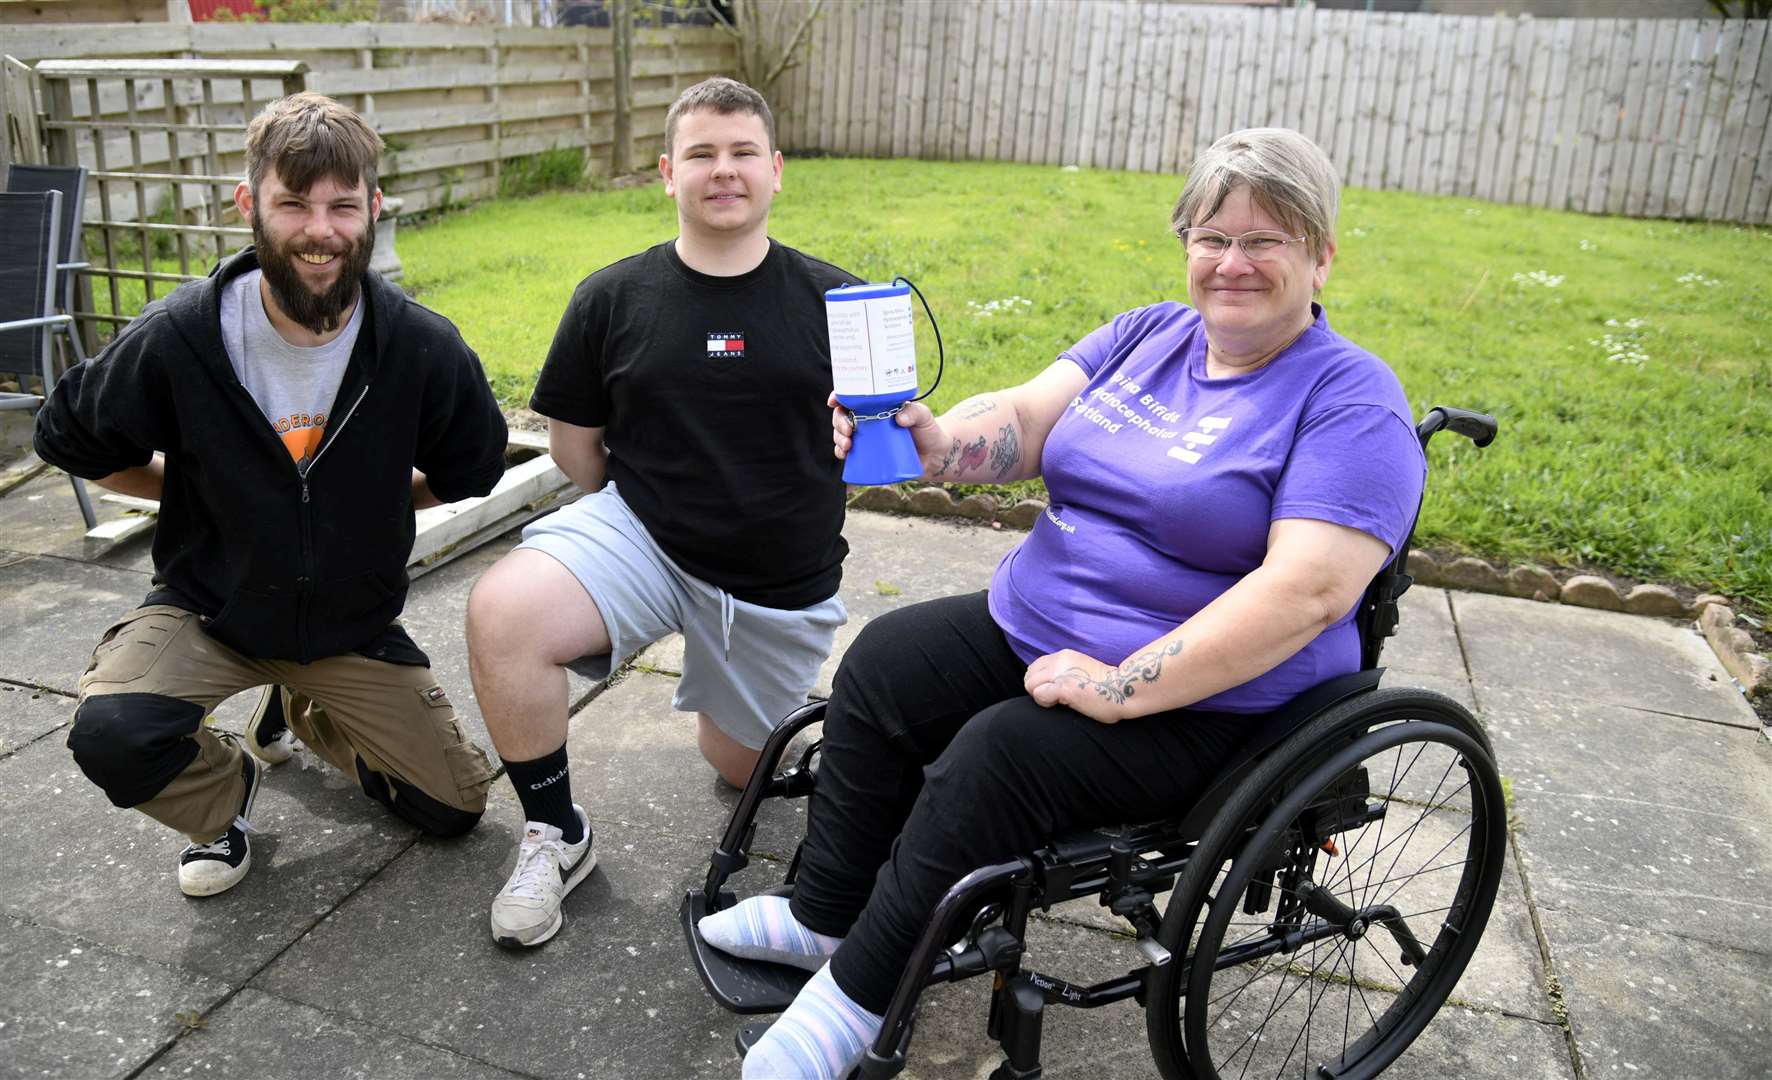 Sharon Mottram along with son Hayden Mottram (right) and friend Nathan Fieldhouse (left) completed a challenge where she pushed herself 177 miles in her wheelchair to raise funds for charity. Picture: Becky Saunderson